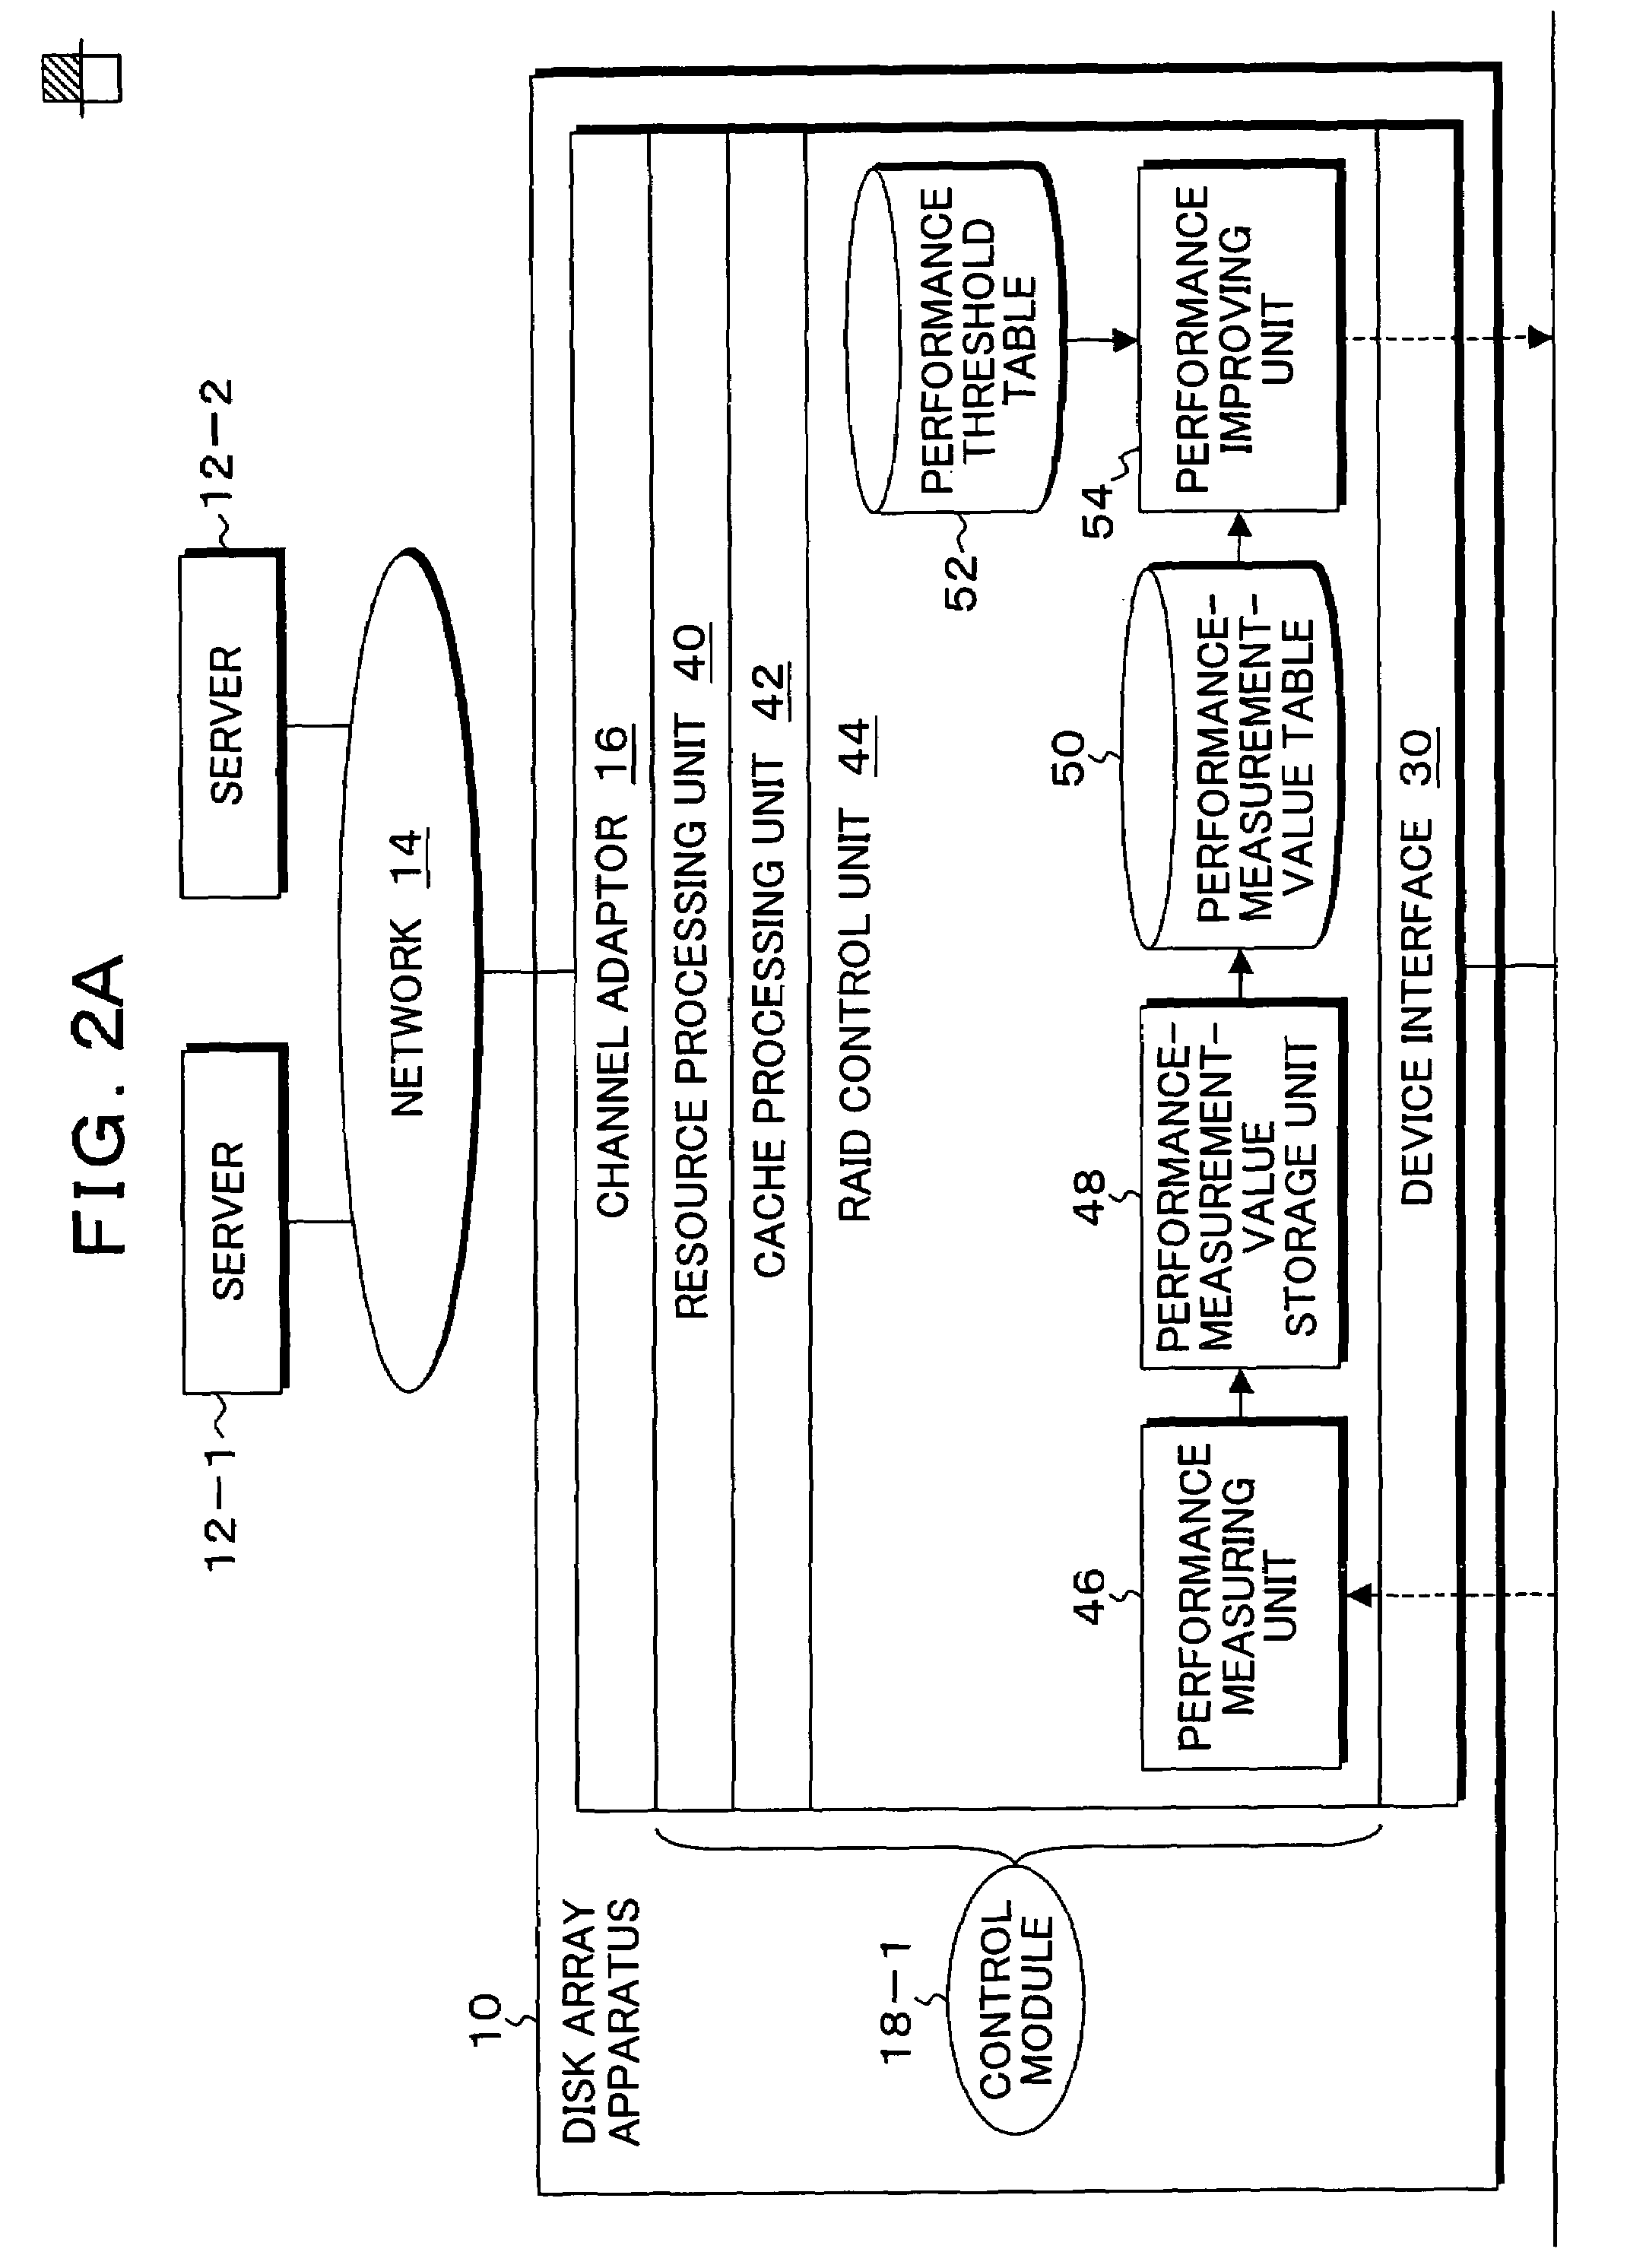 Storage control method, program and apparatus for accessing disk array